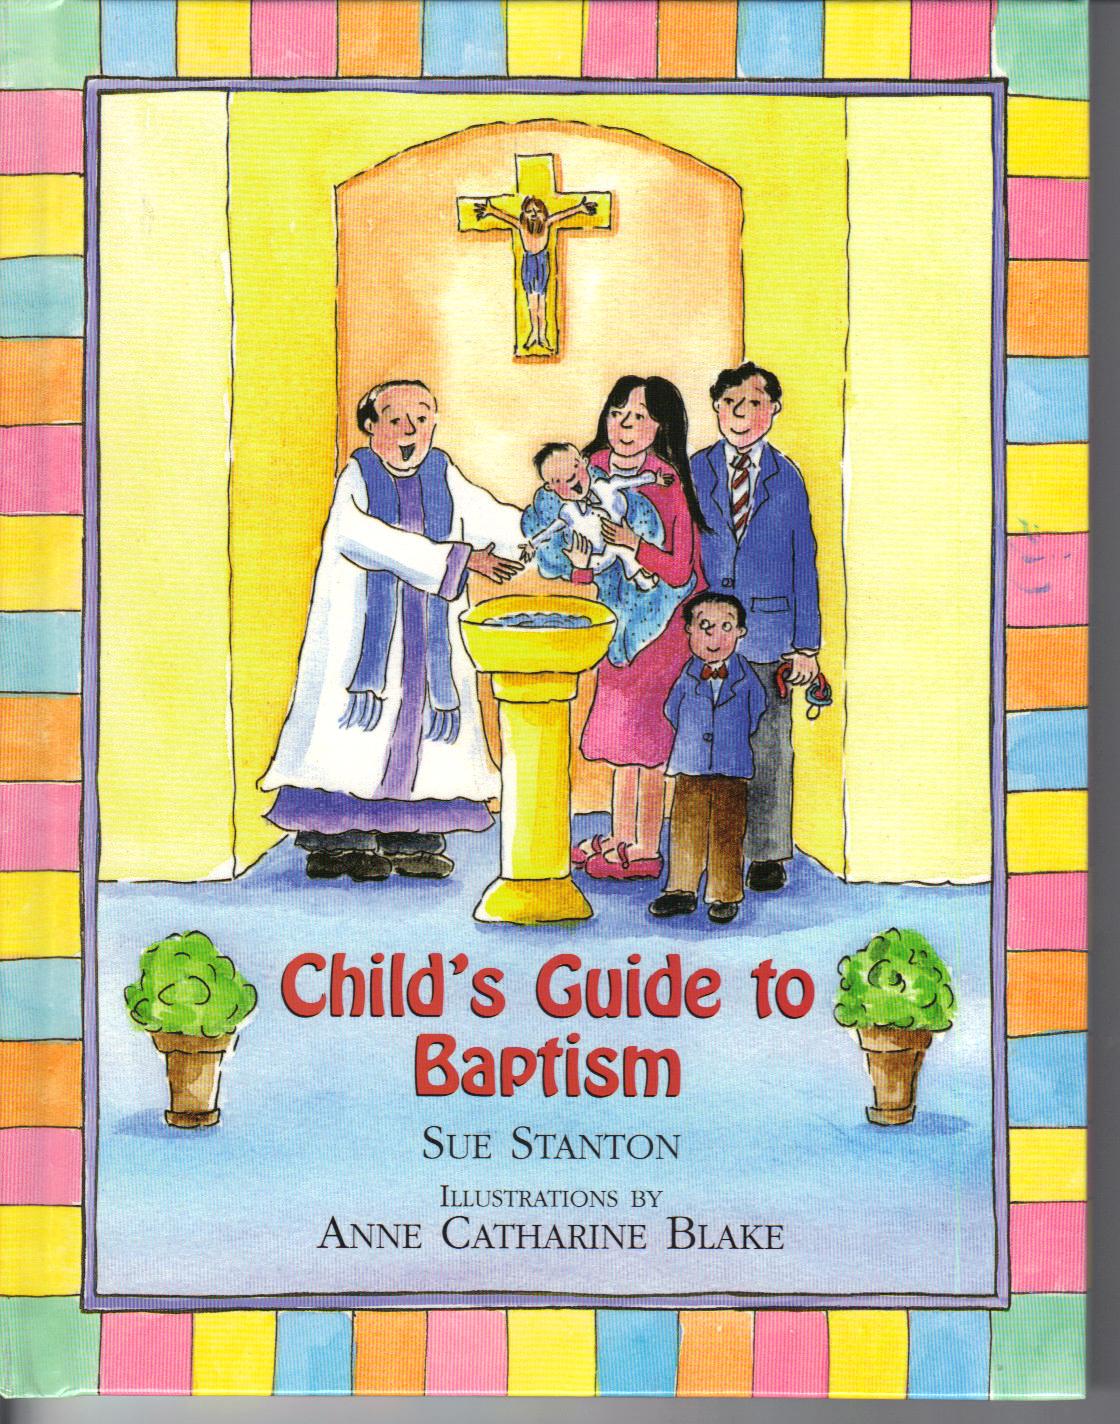 Child's Guide to Baptism by Sue Stanton 108-9780809167289